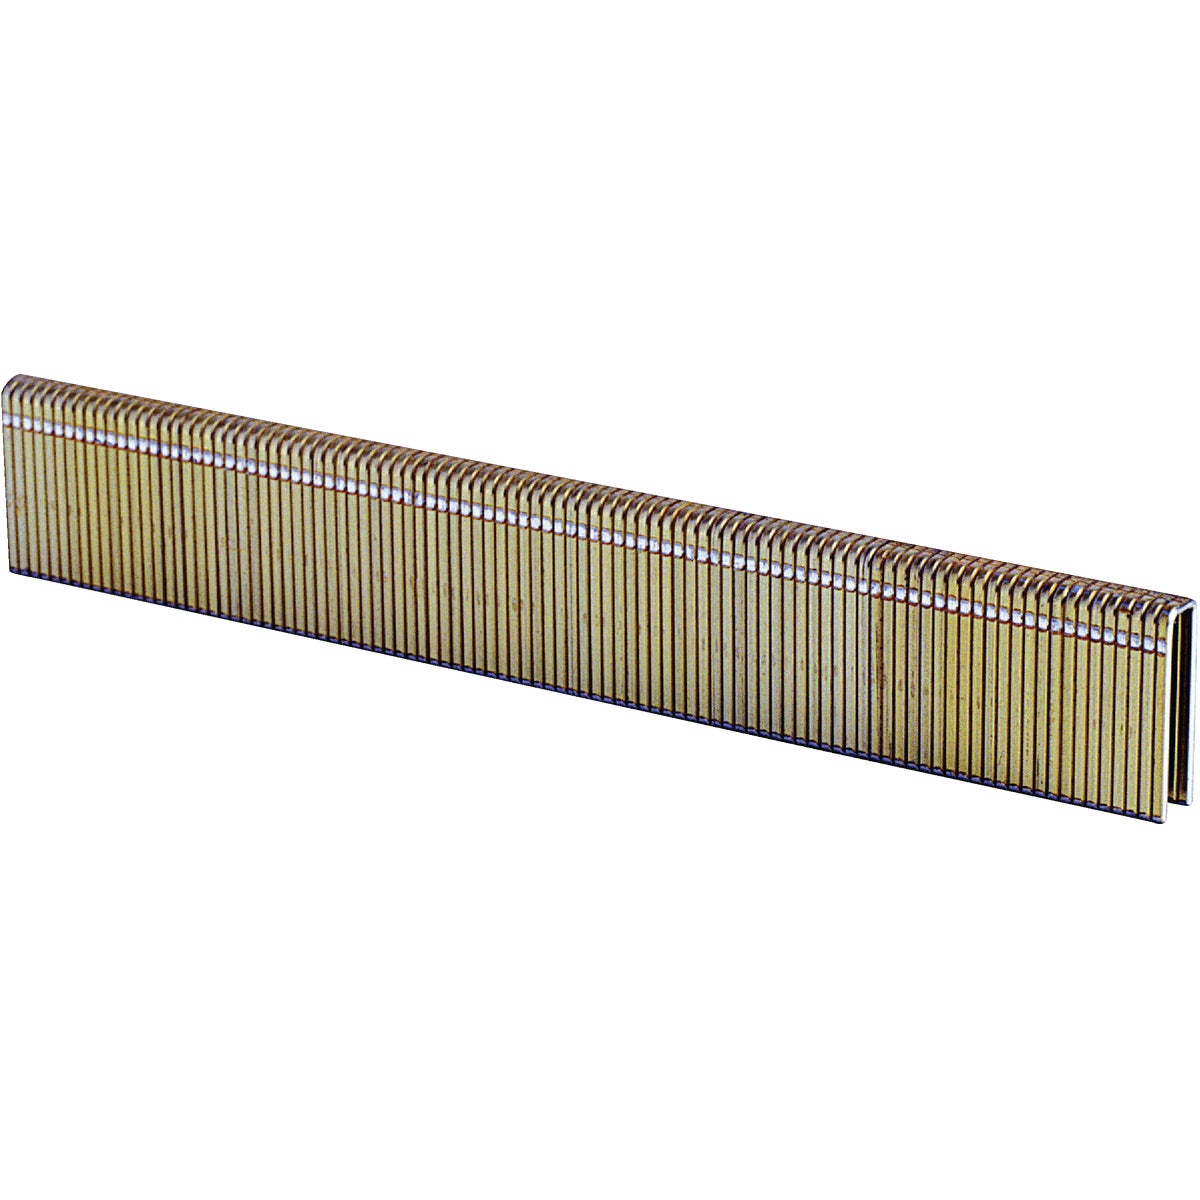 Item 300671, Narrow crown staples are used for molding, trim, lattice, soffits, fascia, 